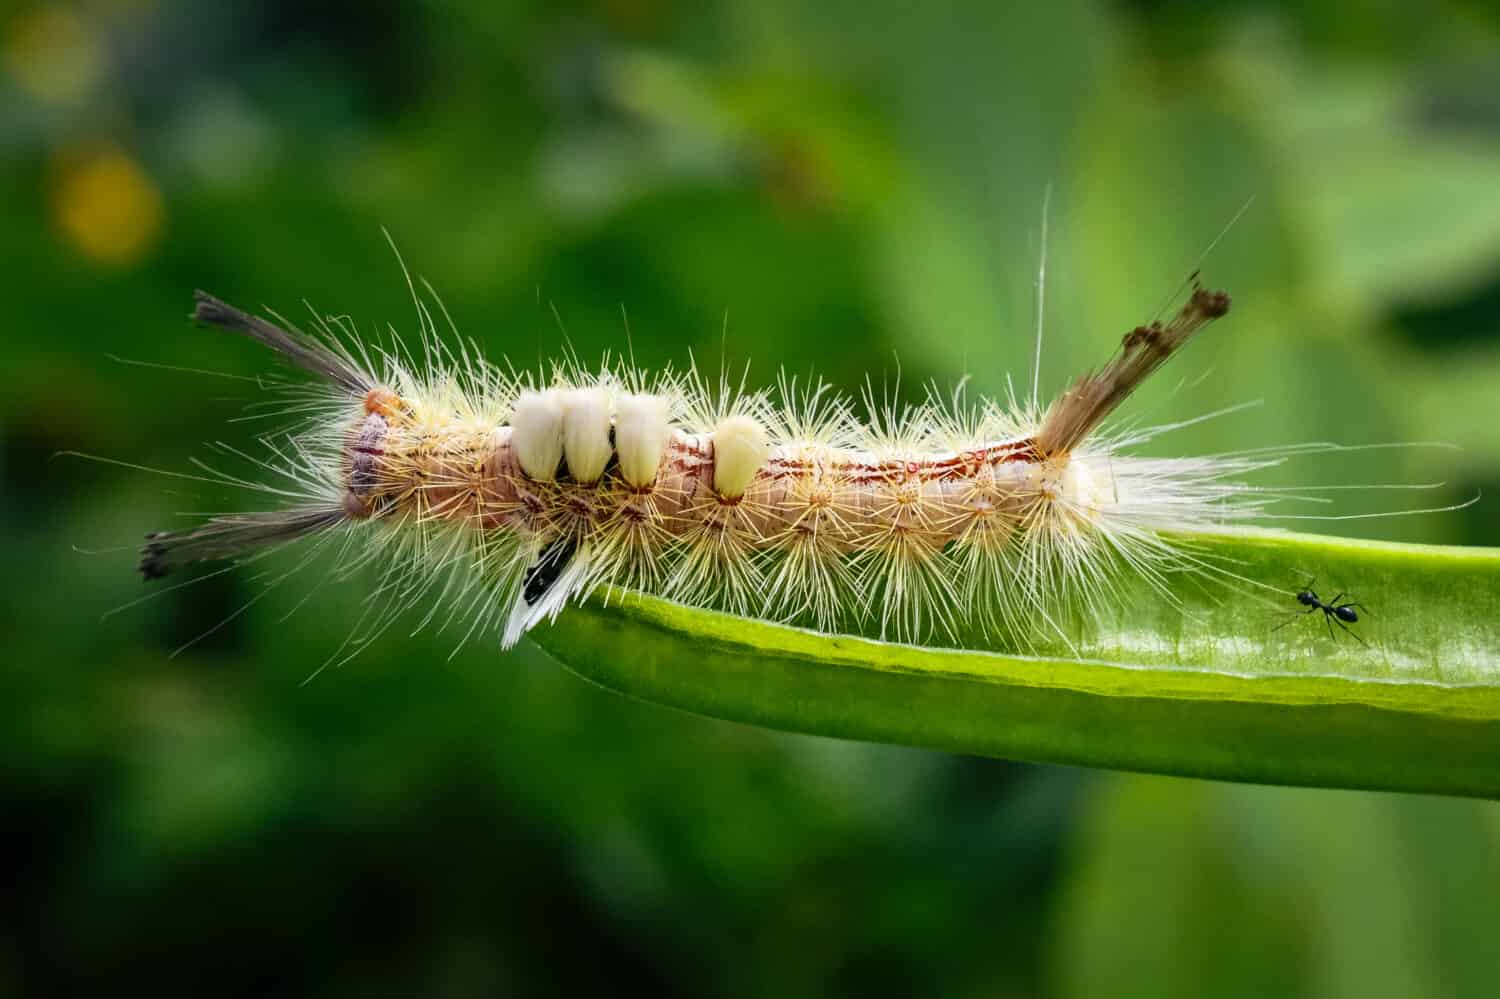 The White Marked Tussock Moth Caterpillar